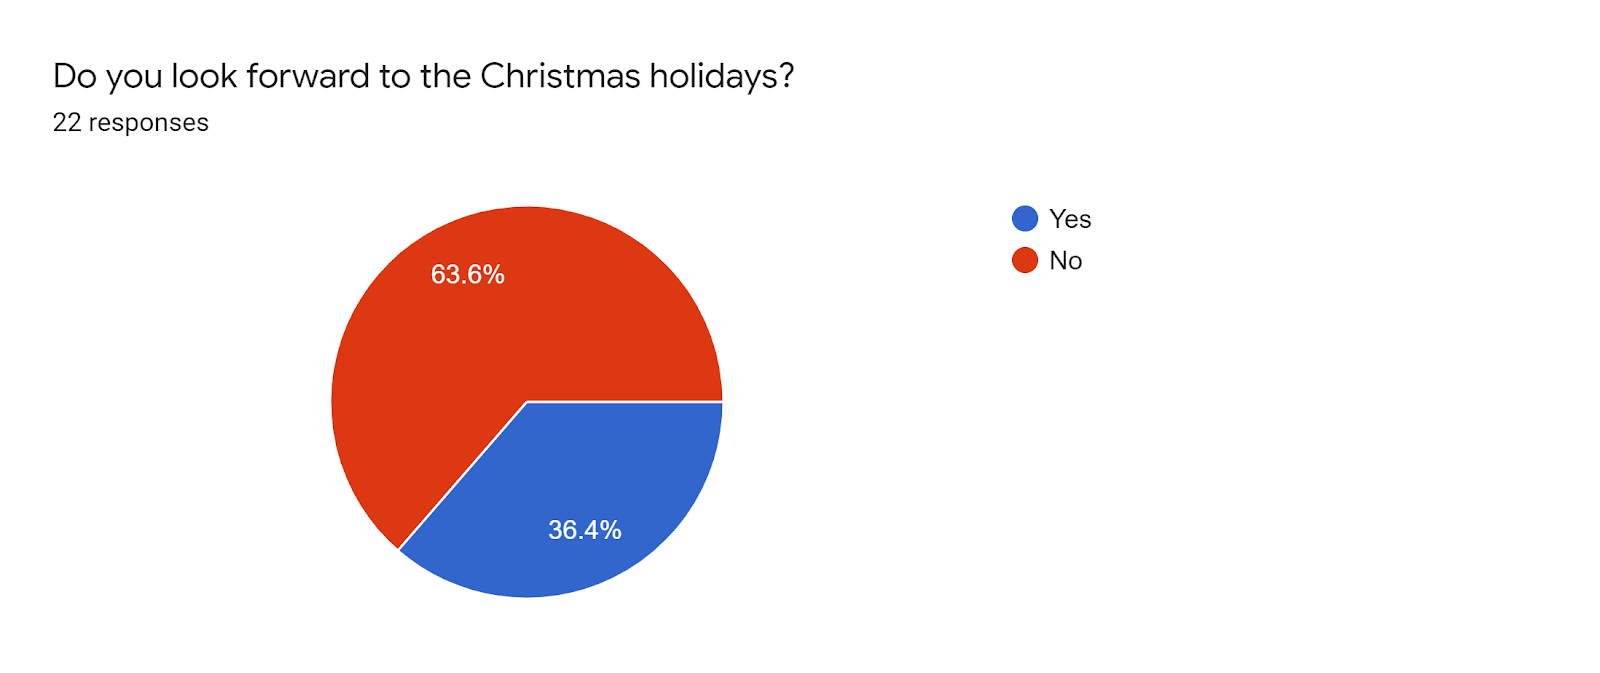 Forms response chart. Question title: Do you look forward to the Christmas holidays?. Number of responses: 22 responses.